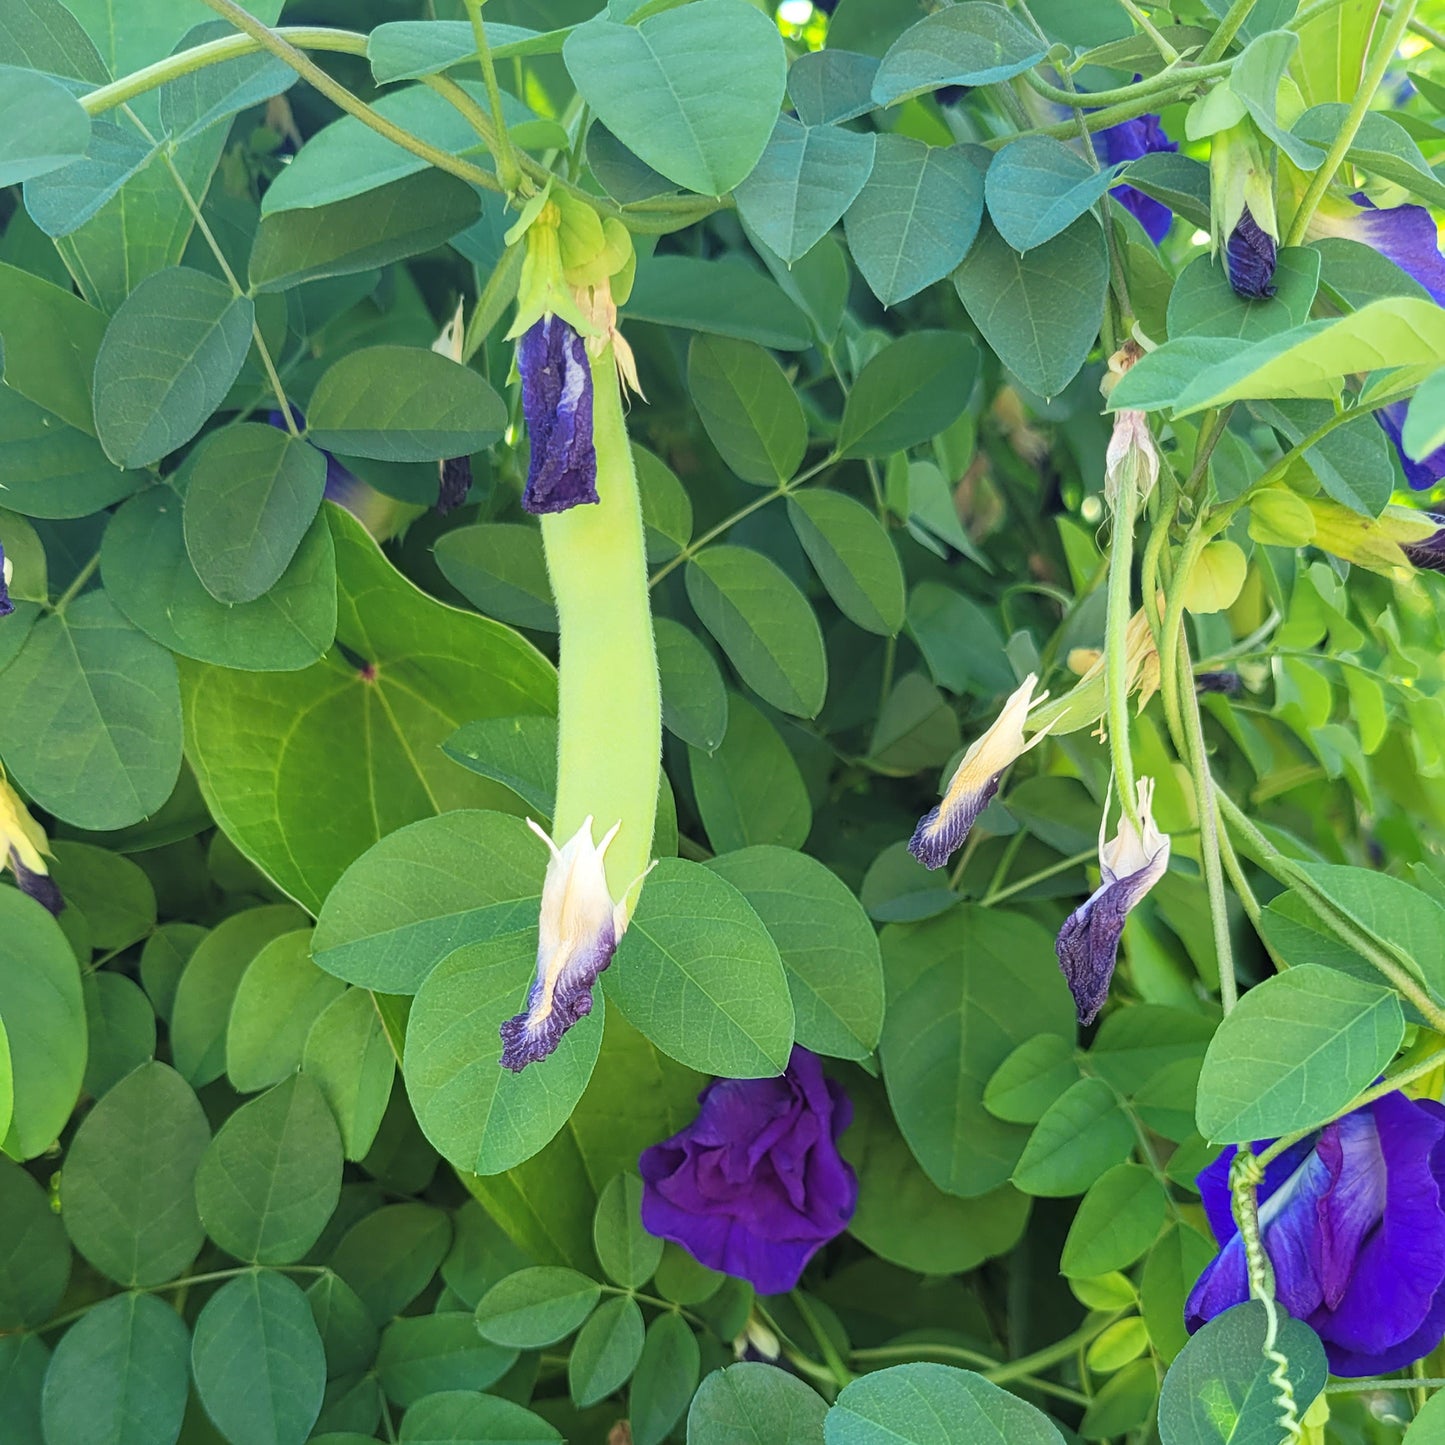 15 SEEDS of Butterfly Pea Plant- Clitoria ternatea